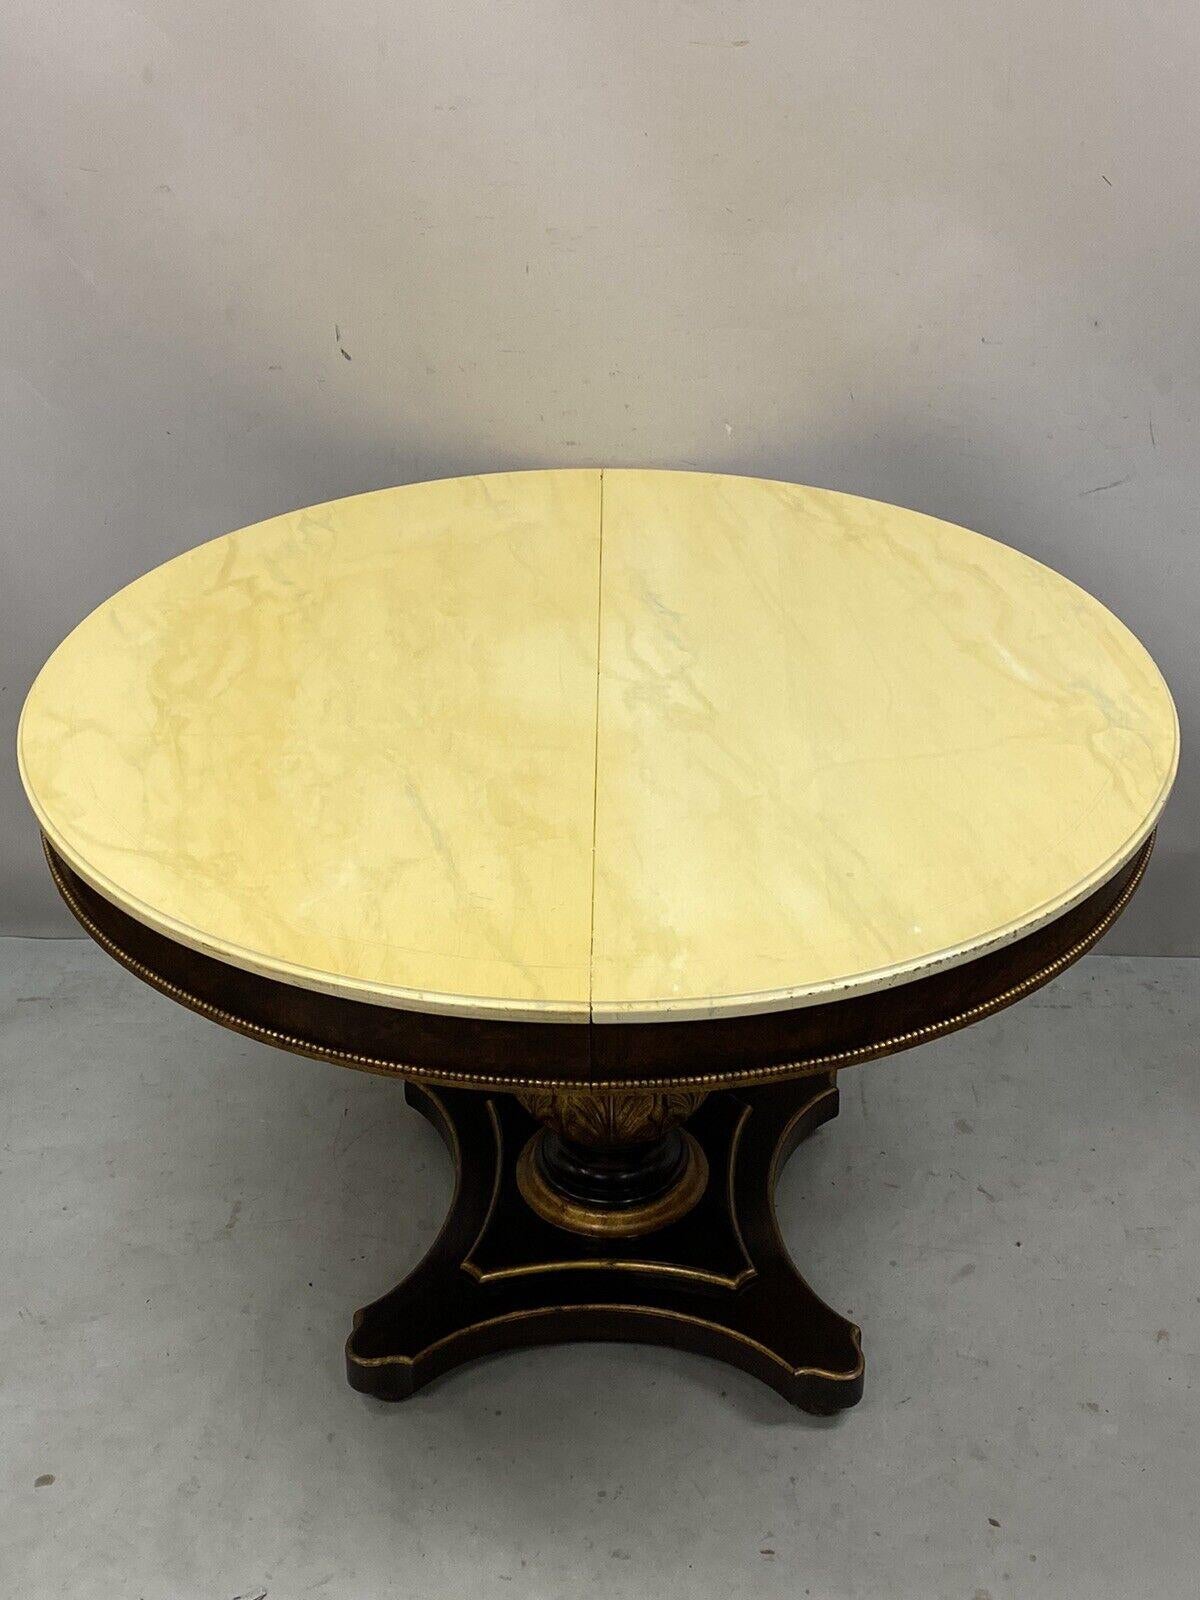 Wood Vintage Italian Regency Style Pedestal Base Round Dining Table Cream Lacquer Top For Sale